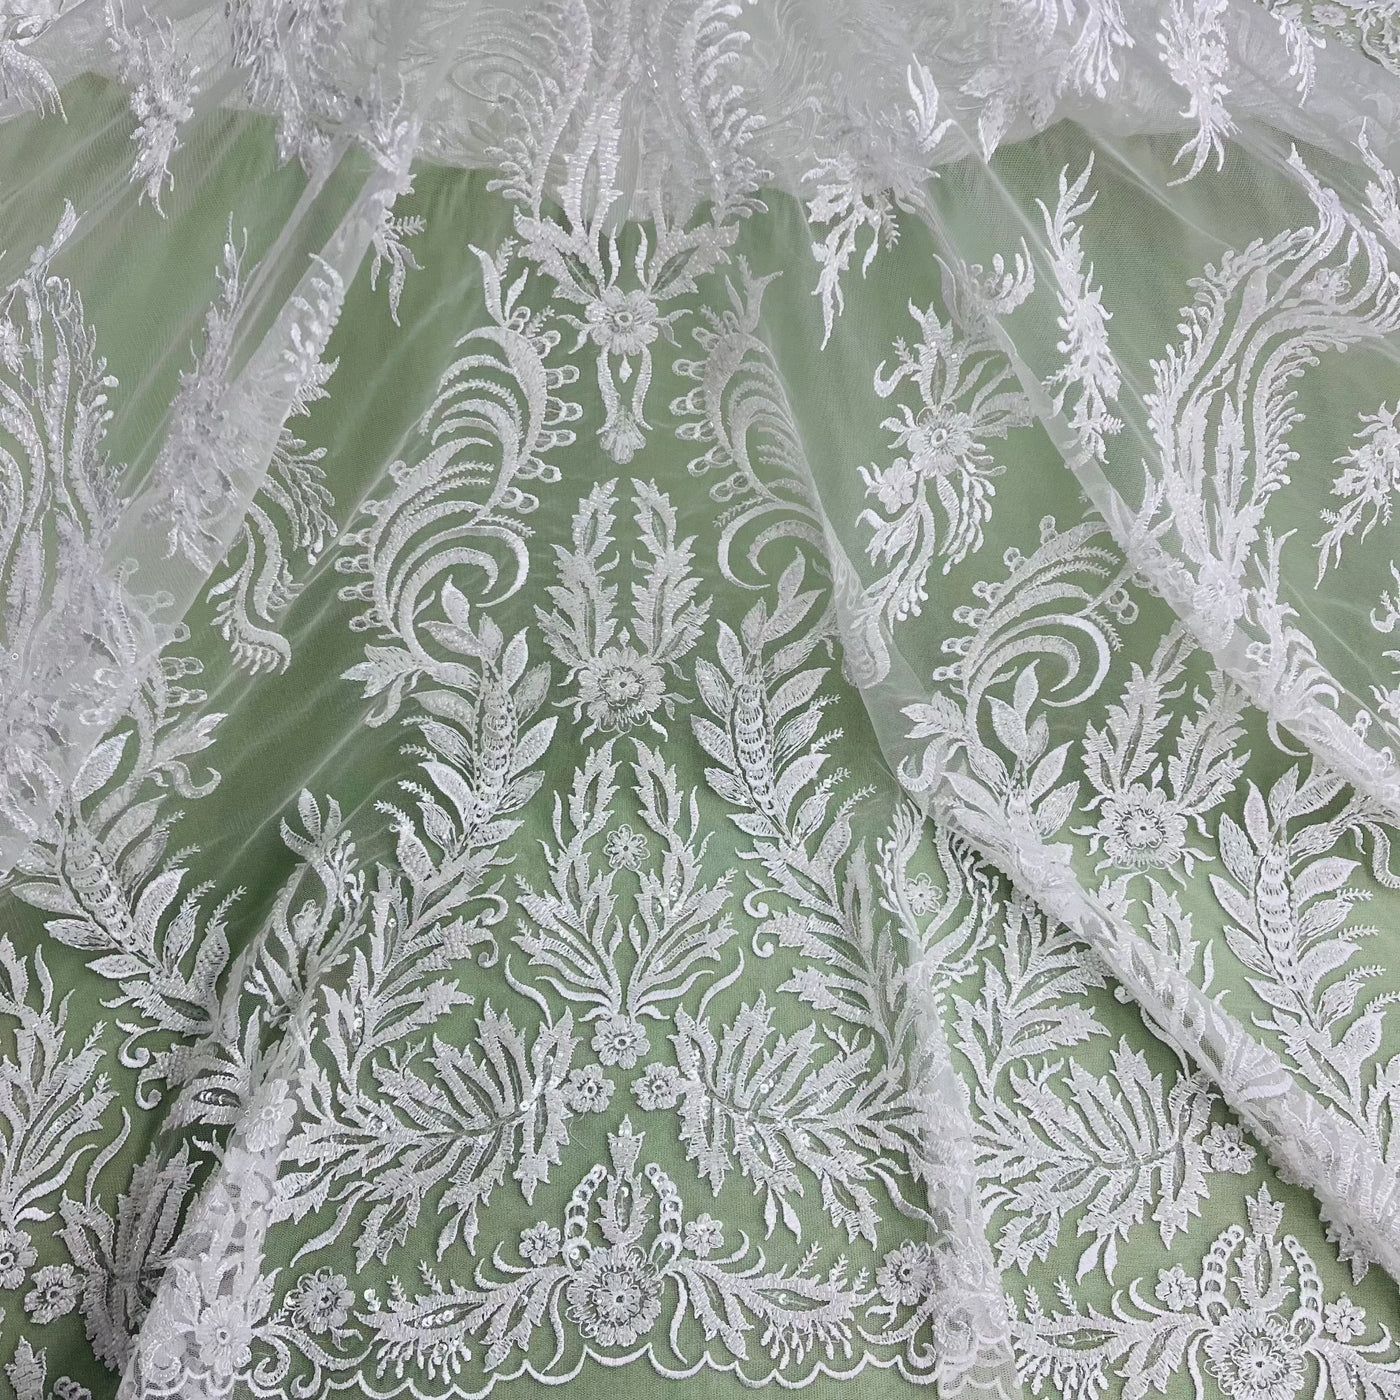 Beaded & Sequined Lace Fabric Embroidered on 100% Polyester Net Mesh | Lace USA - GD-13322 Ivory